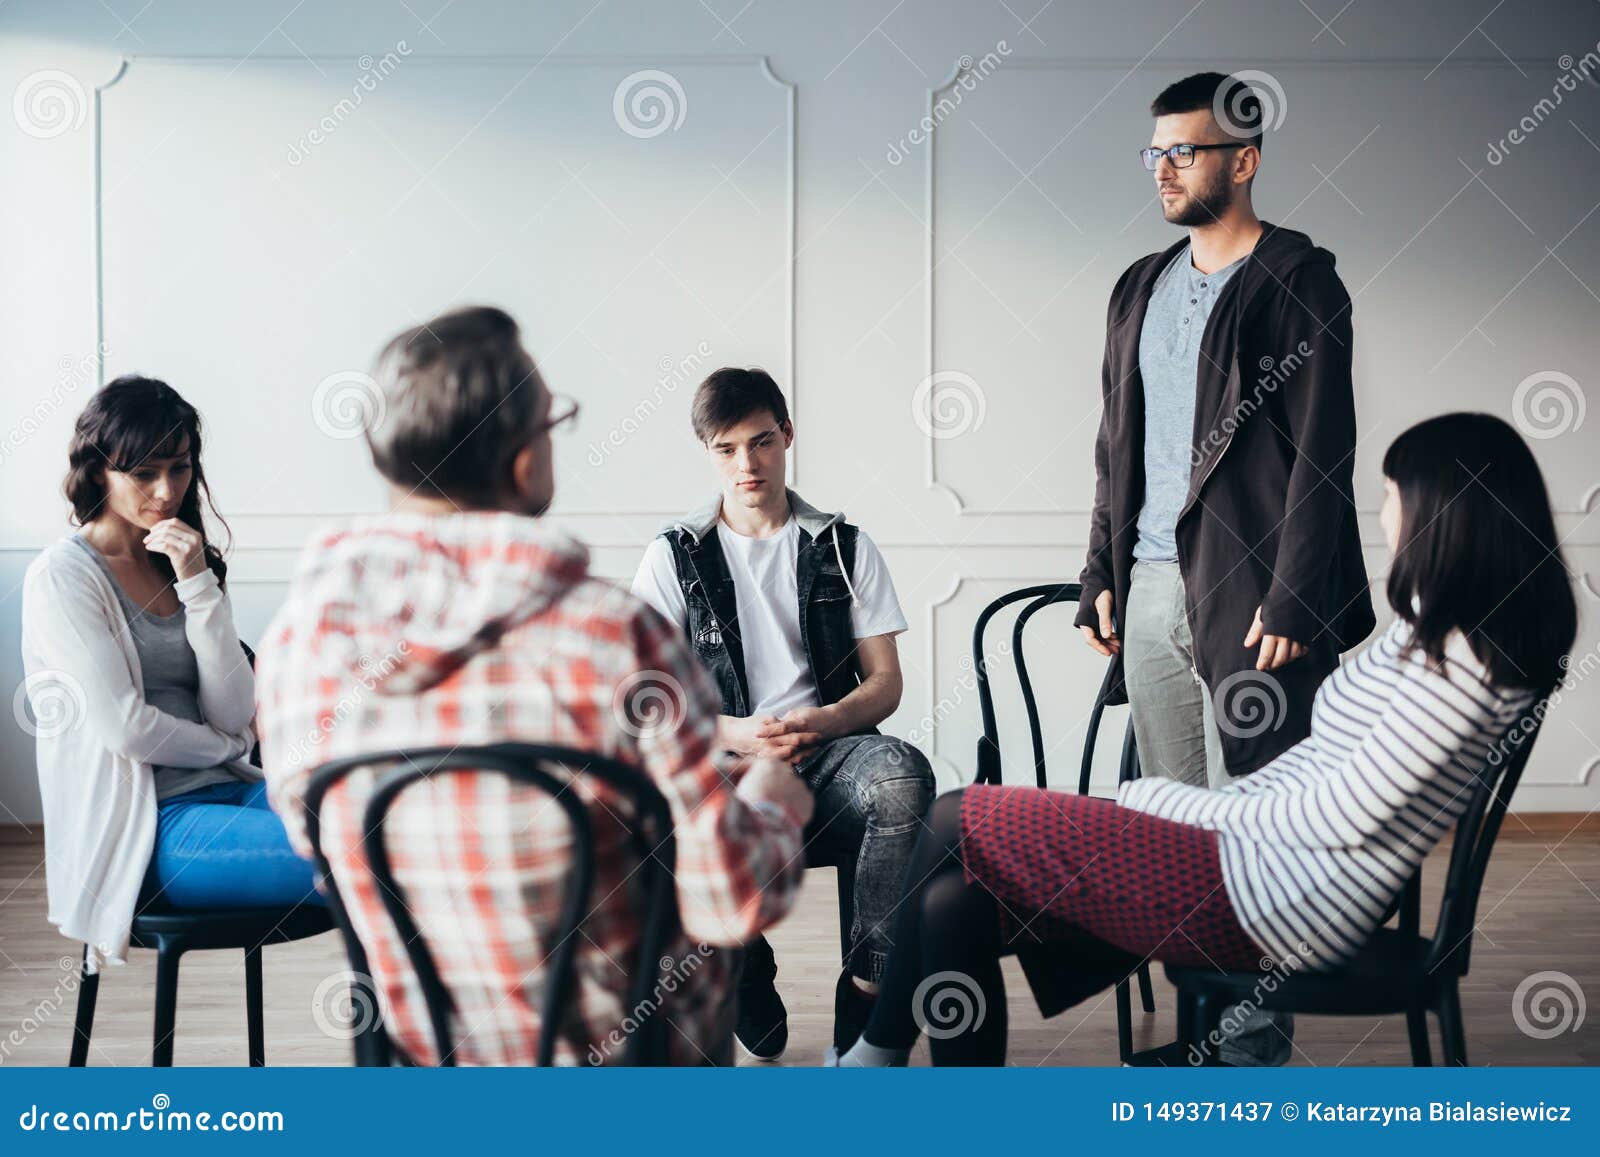 young man admitting that he is an alcoholic during support group meeting